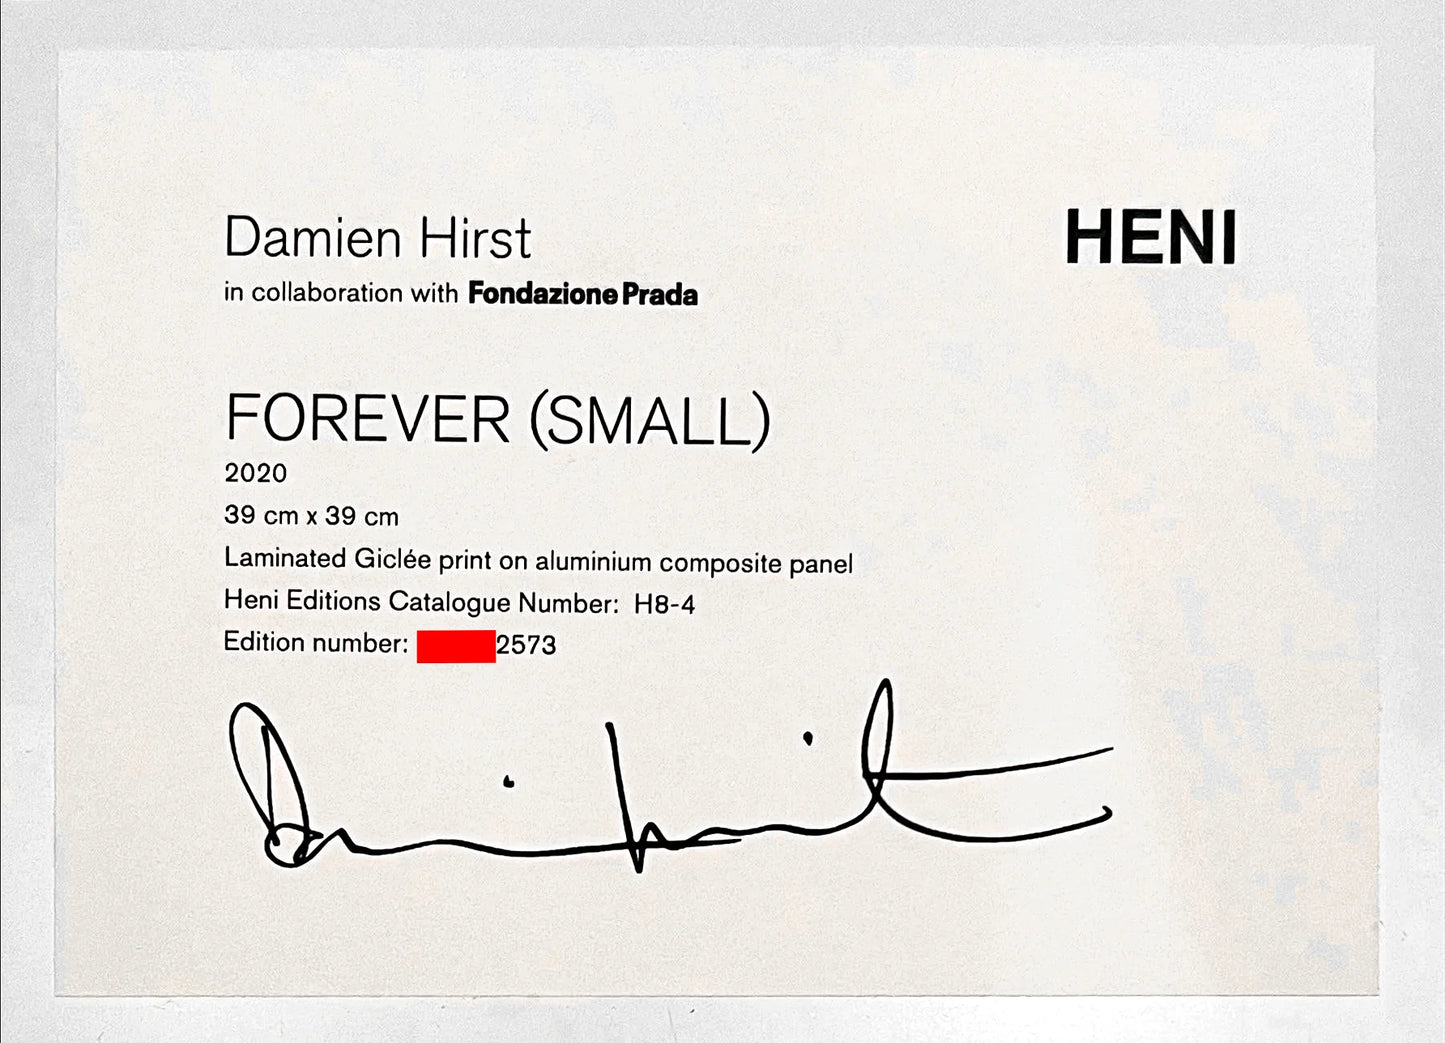 Damien Hirst, Stampa Giclée Forever (Small), MIGLIORE OFFERTA